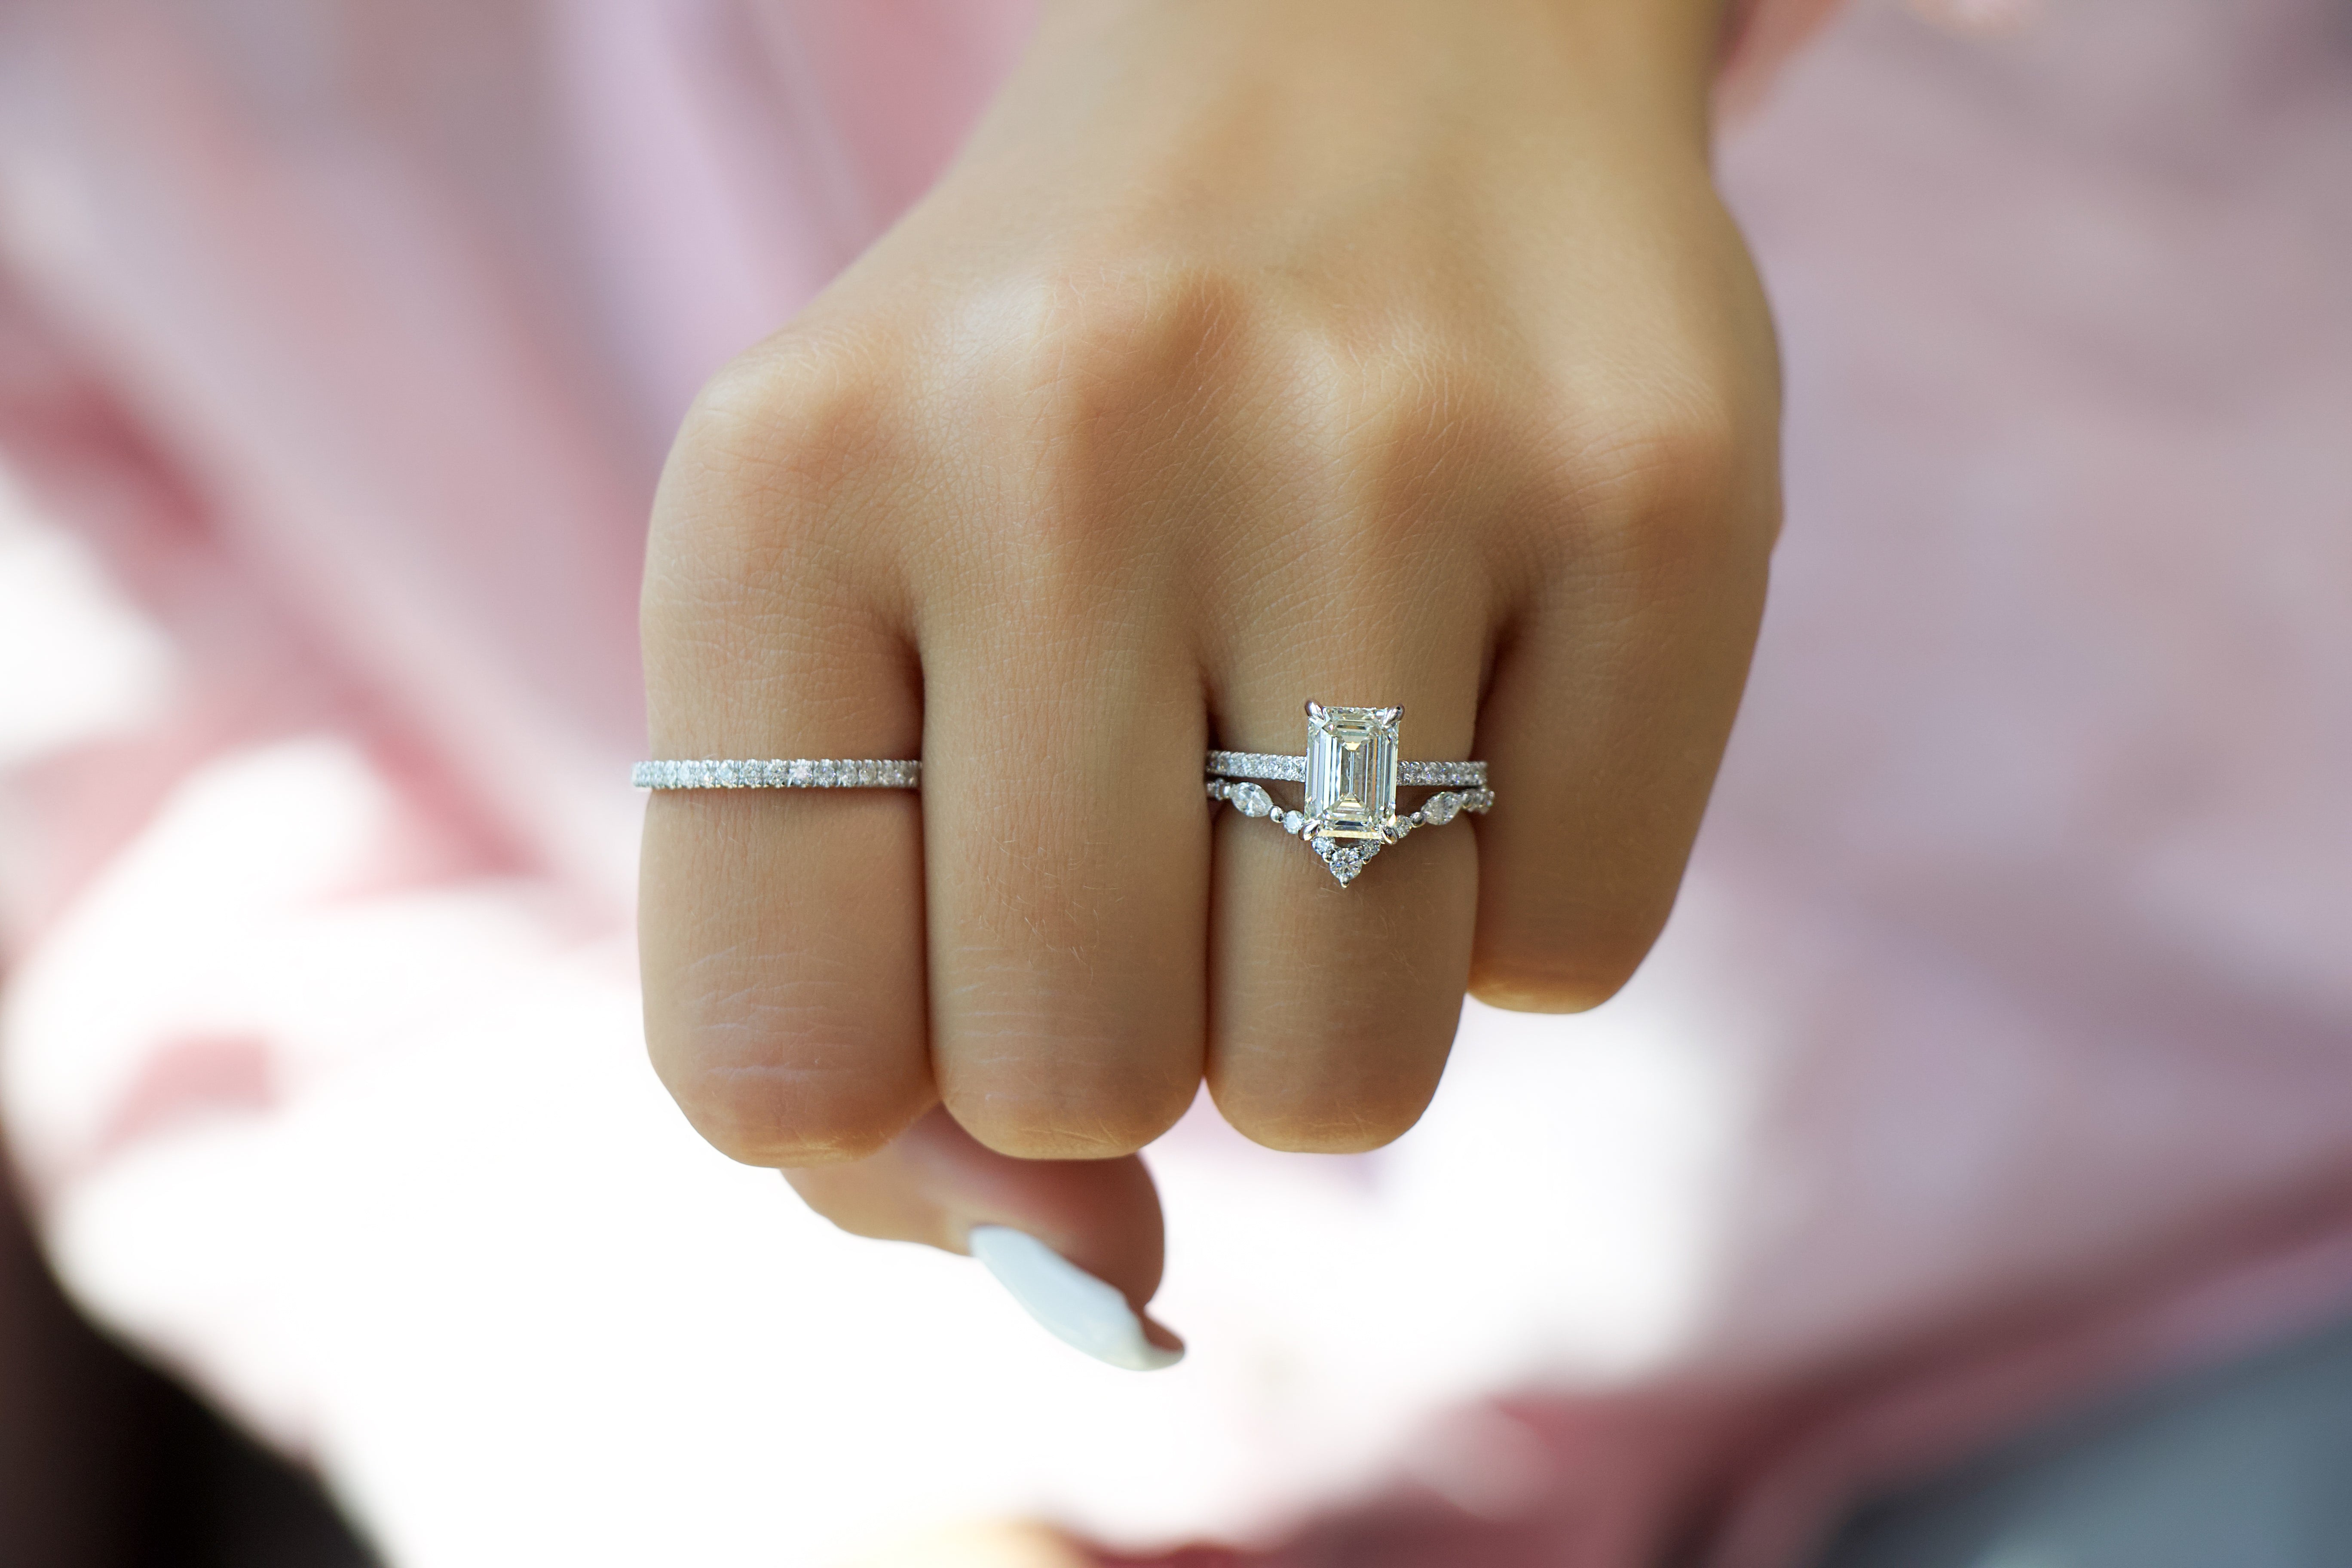 Wedding Rings vs Engagement Rings – What's the Difference? 5